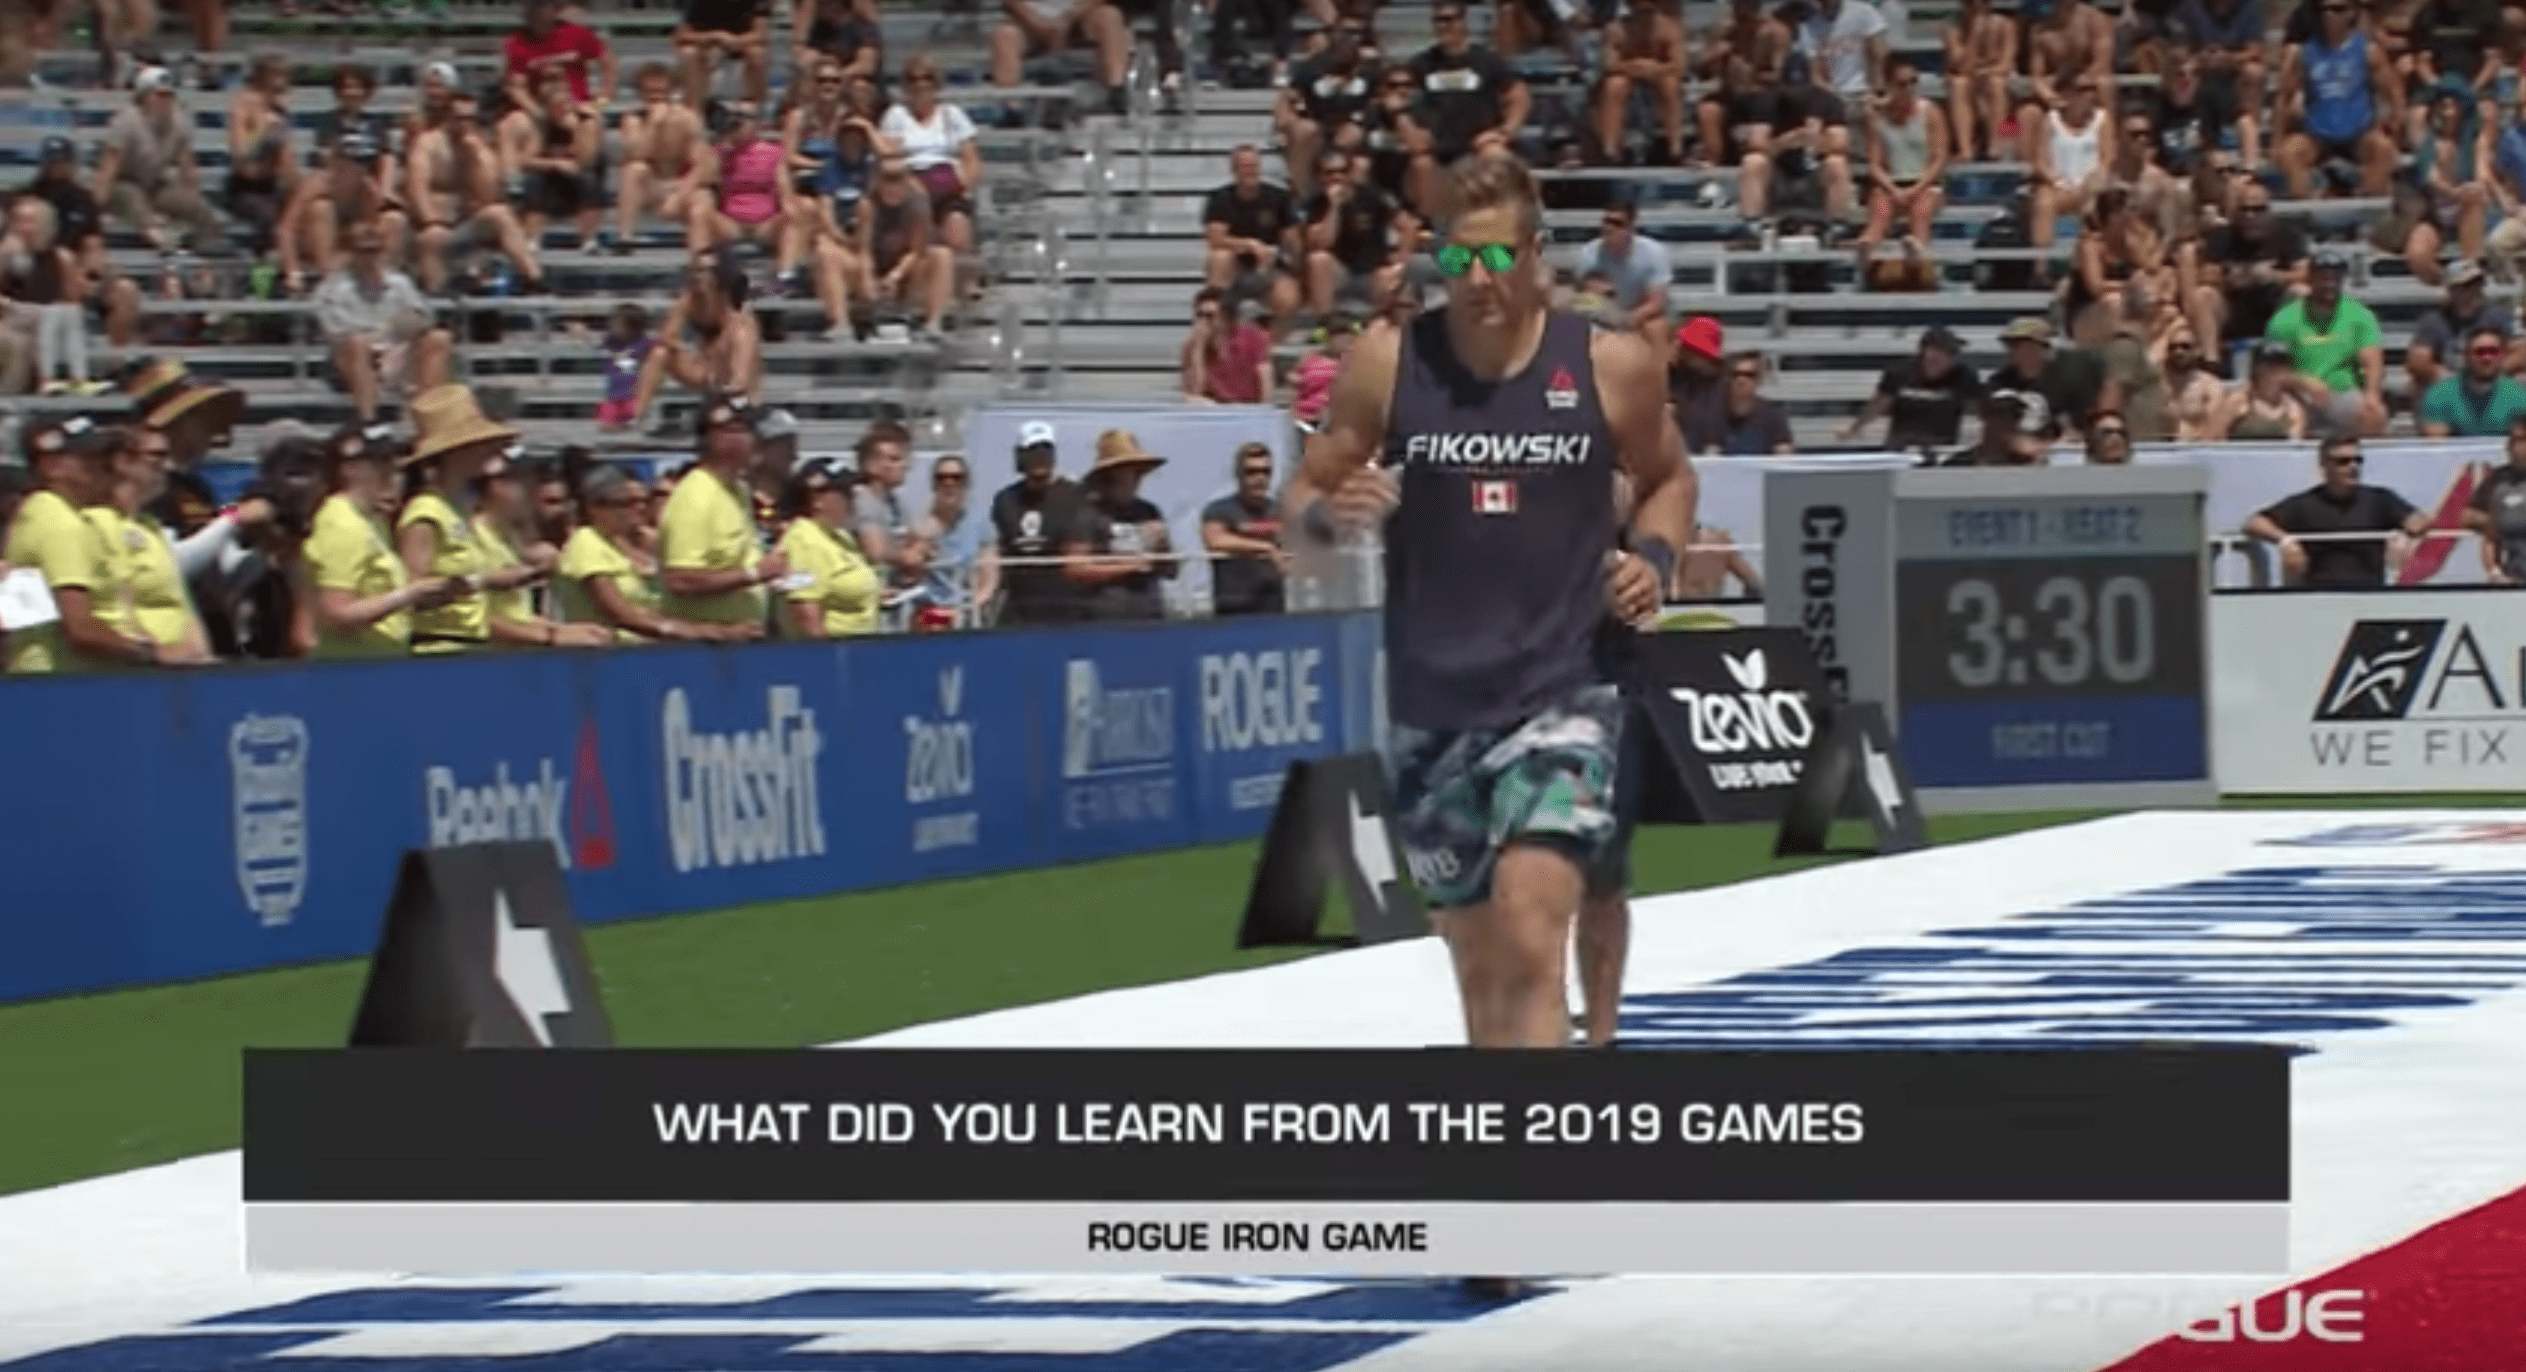 Brent on Rogue Iron Game “Live Commentary” at 2019 CF Games